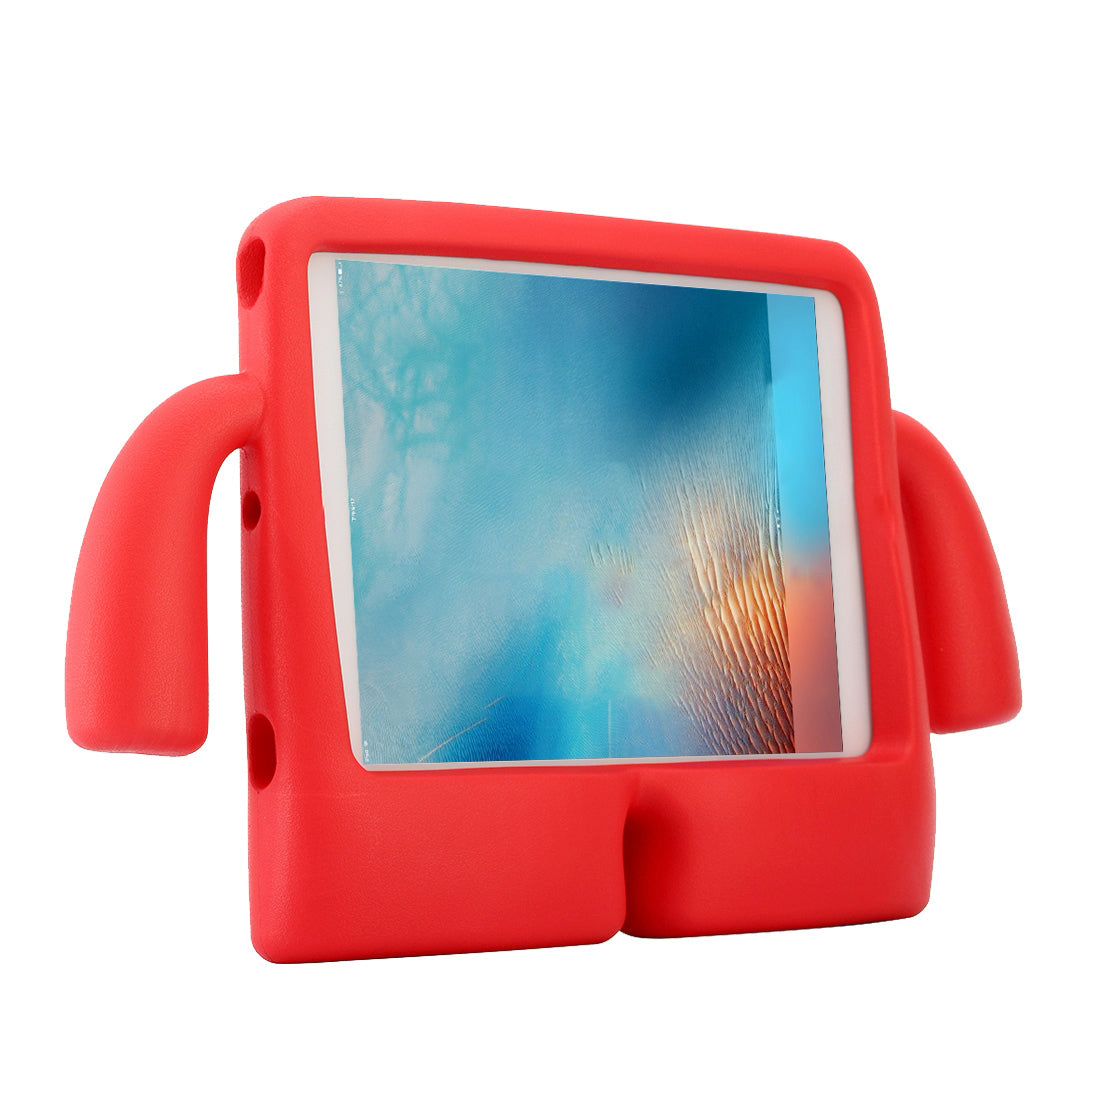 For Apple iPad Mini 1 / 2 / 3 Kids Case Shockproof Cover With Carry Handle - Red